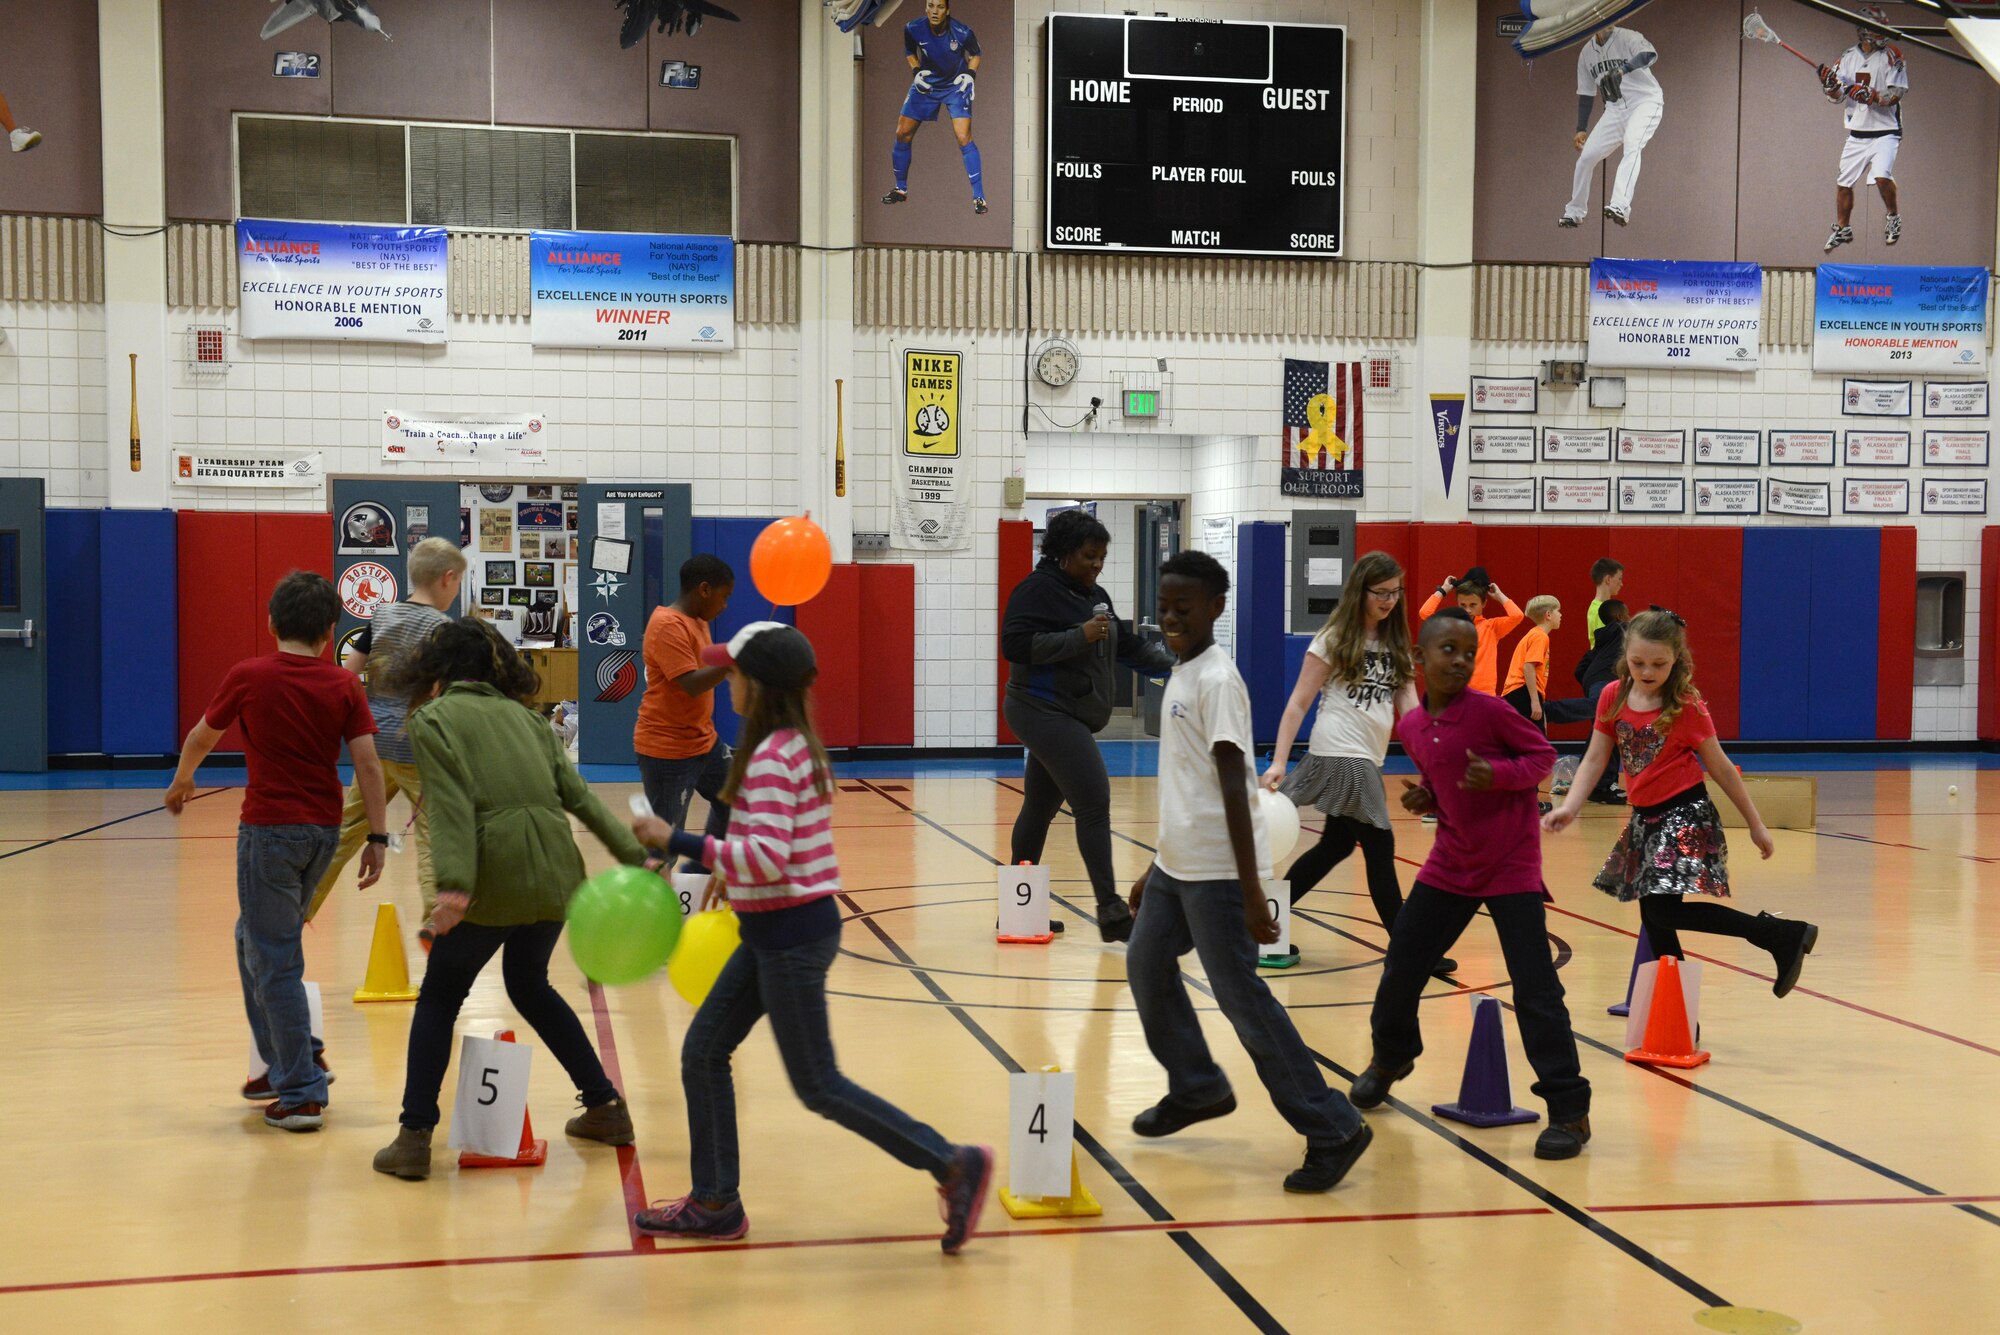 Children participate at a cupcake walk during the Worldwide Day of Play at the Kennecott Youth Center at Joint Base Elmendorf-Richardson, Alaska, Sept. 21, 2016. The Worldwide Day of Play is an annual event that encourages kids and parents to go outside and play instead of sitting indoors and watching television. Due to inclement weather, the Kennecott Youth Center provided several games and stations like the cupcake walk, indoor rock climbing, batting cage, pitching mound and more.